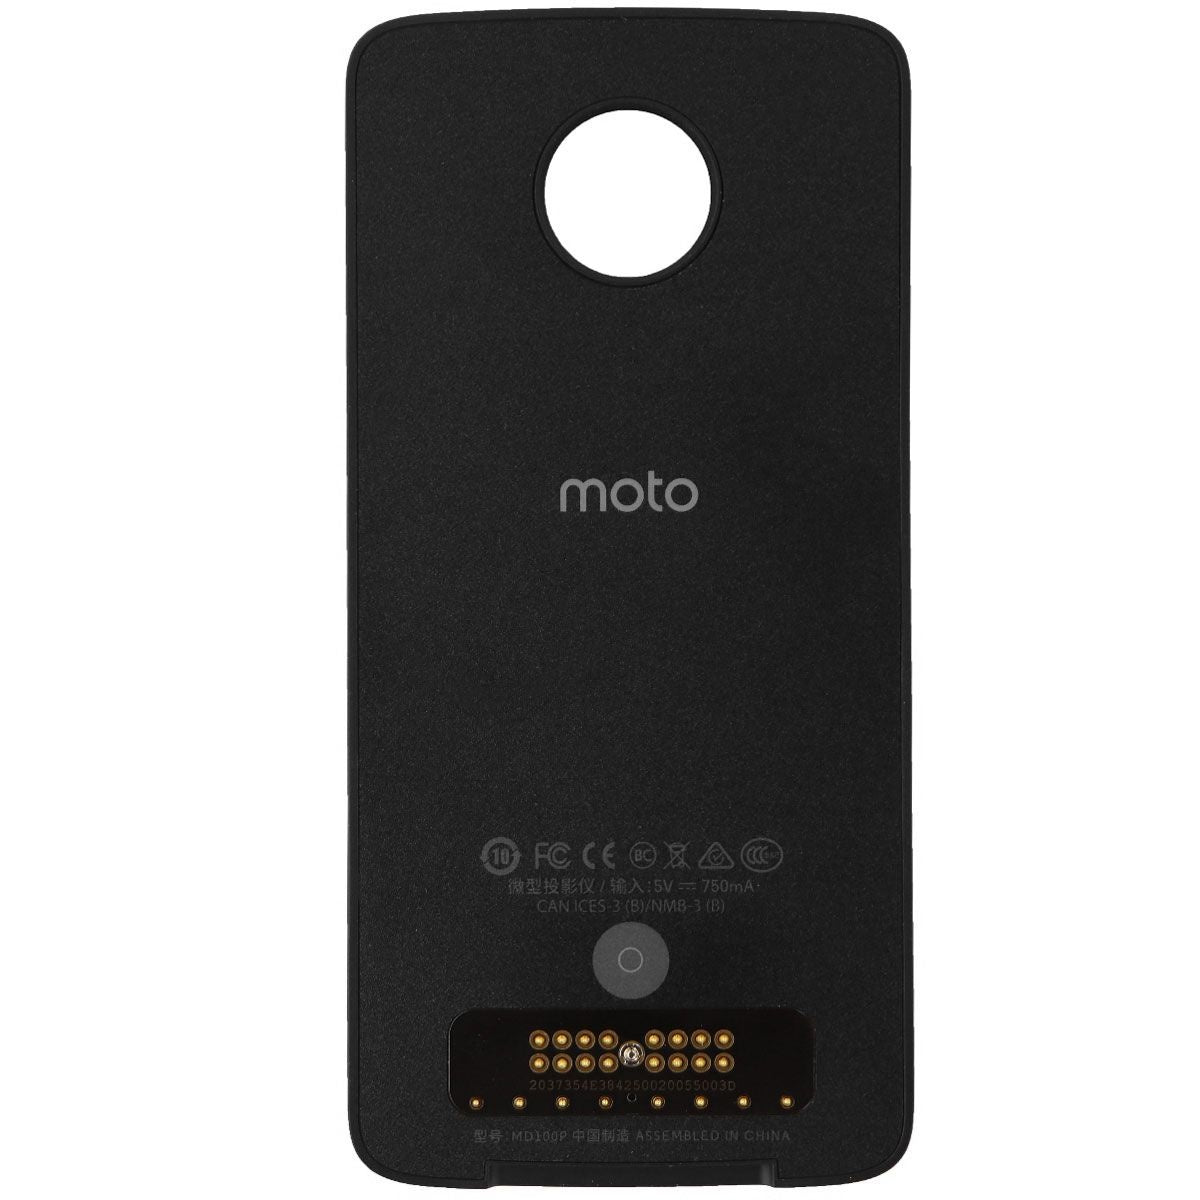 Motorola Insta-Share Projector Attachment MotoMod for Moto Z Phones - Black Cell Phone - Other Accessories Motorola    - Simple Cell Bulk Wholesale Pricing - USA Seller